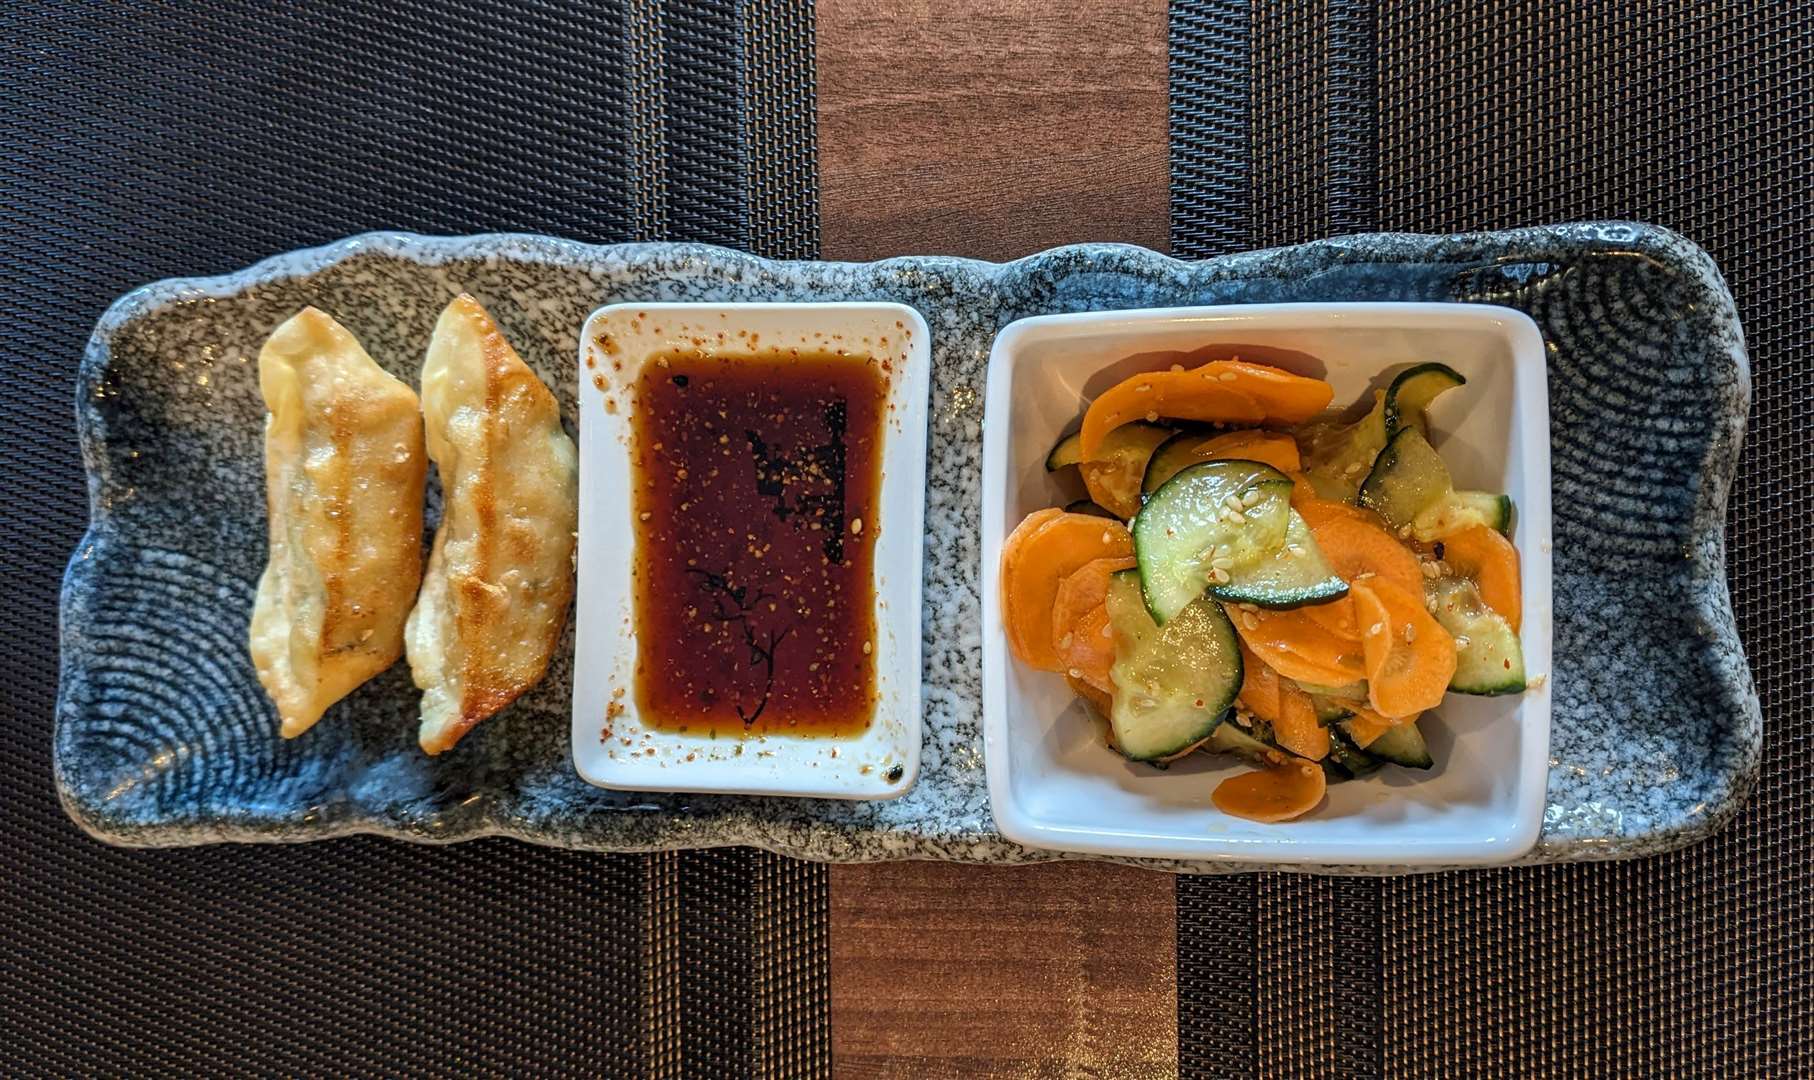 An appetiser of gyoza and pickled vegetables kicked things off